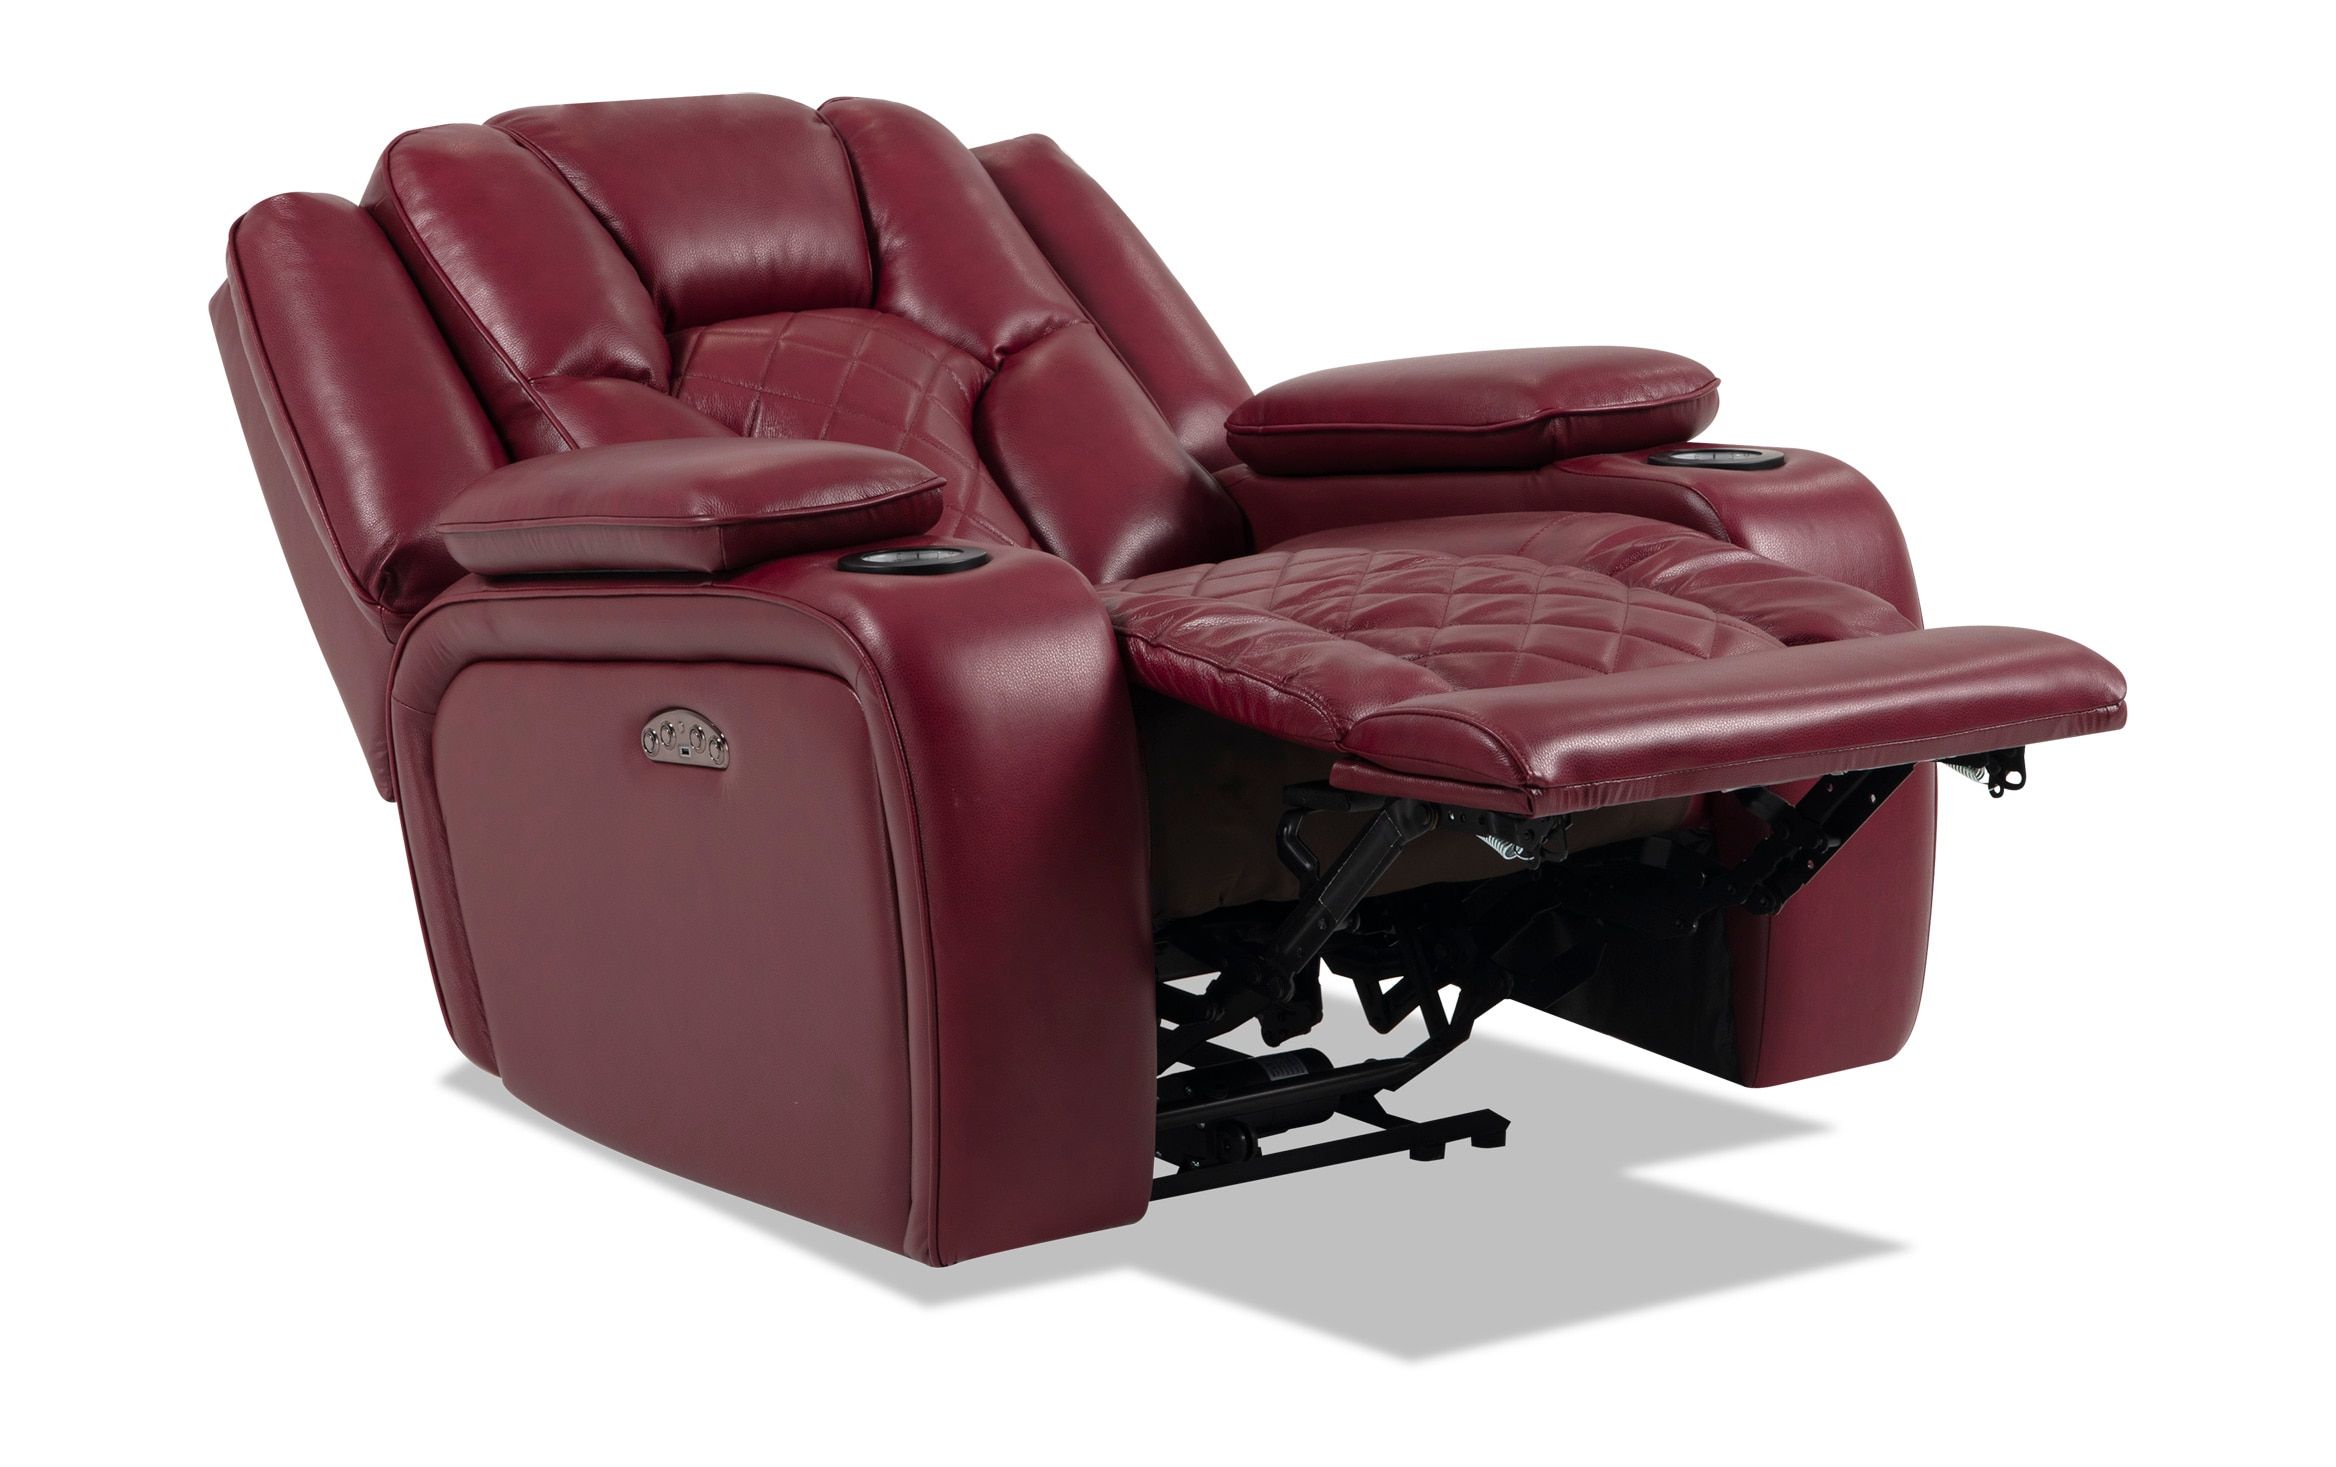 Panther Fire Leather Dual Power Reclining Sofa – Latest For Panther Fire Leather Dual Power Reclining Sofas (View 1 of 15)